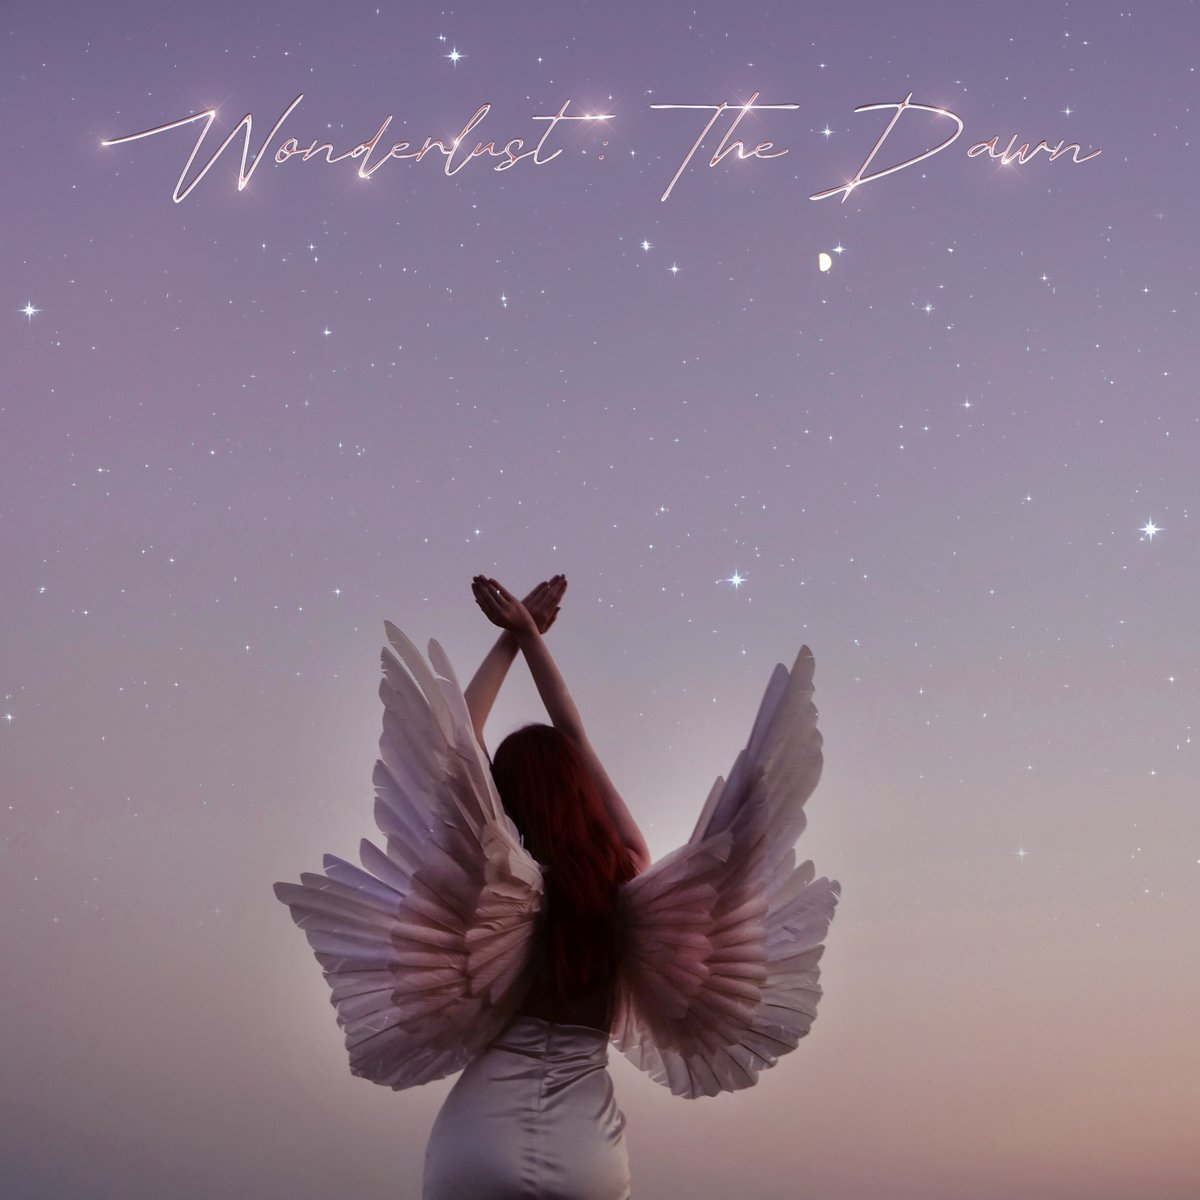 Wonderlust: The Dawn is available everywhere now!! Click the link to give it a listen and let me know which song is your favorite maisykay.com/wonderlustdawn 🥰

#newmusic #popmusic #indiepop #singersongwriter #independentmusician